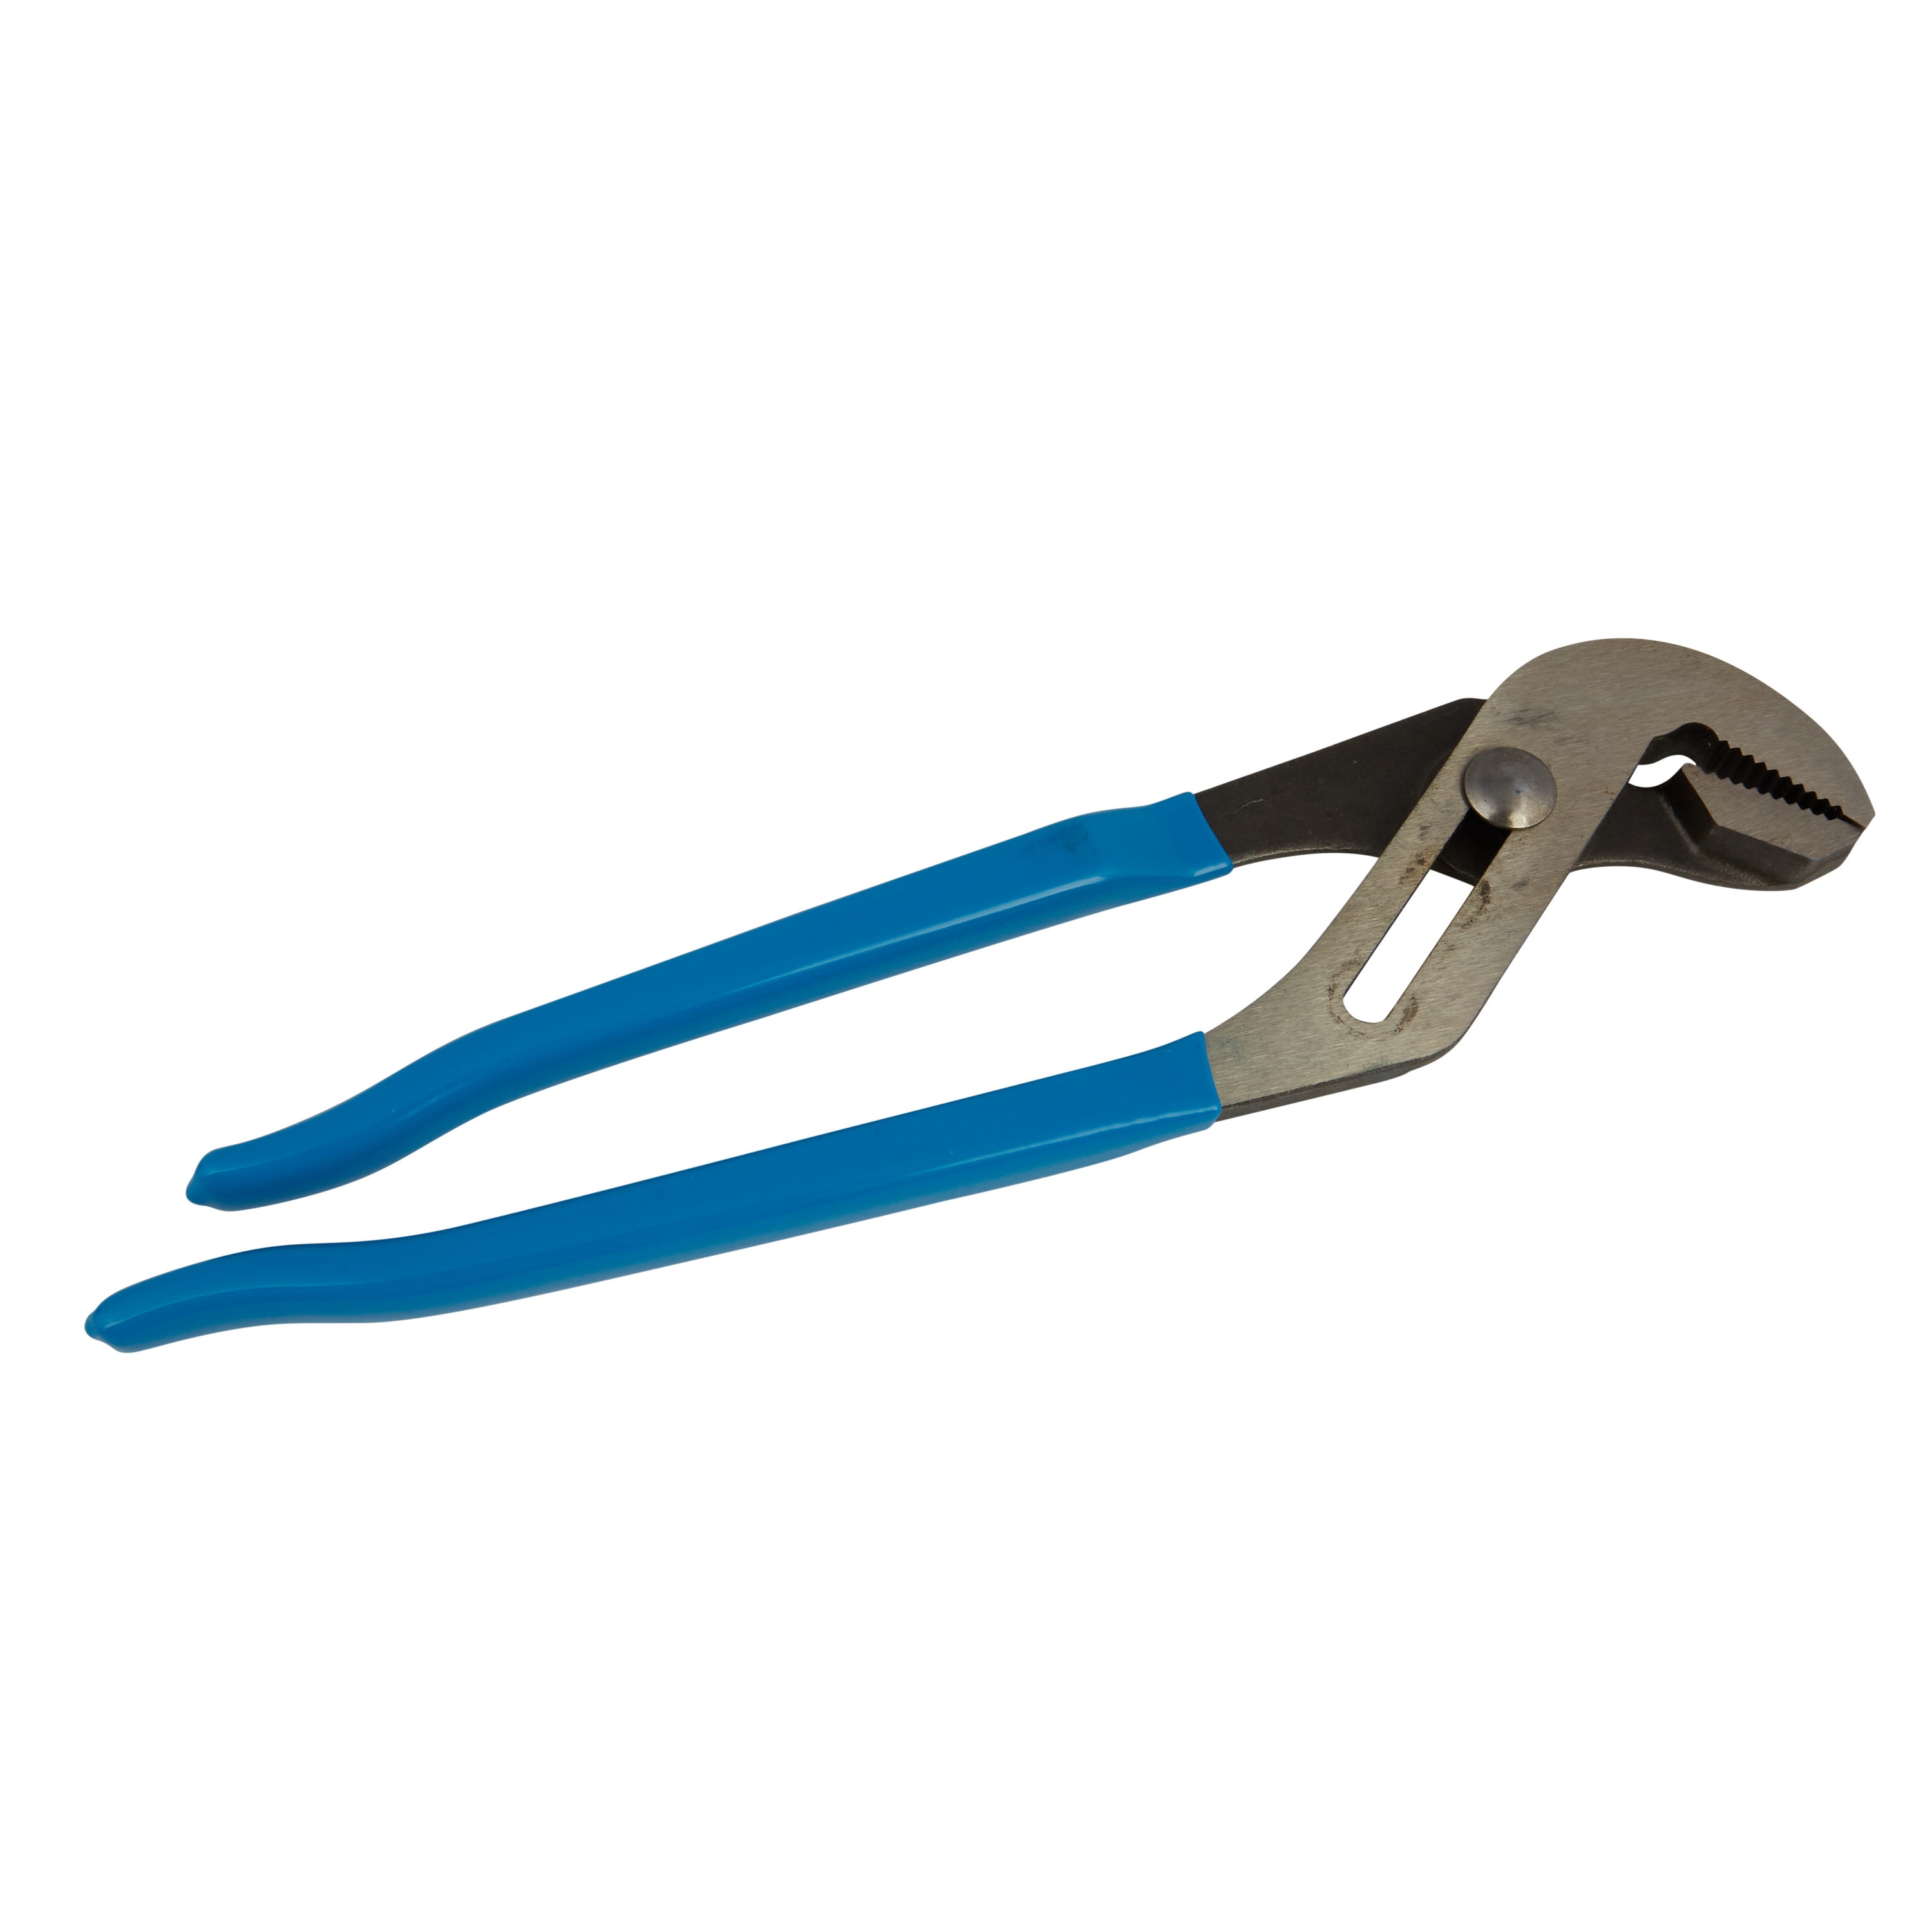 Channellock 12 in. Tongue and Groove Slip Joint Pliers 440 - The